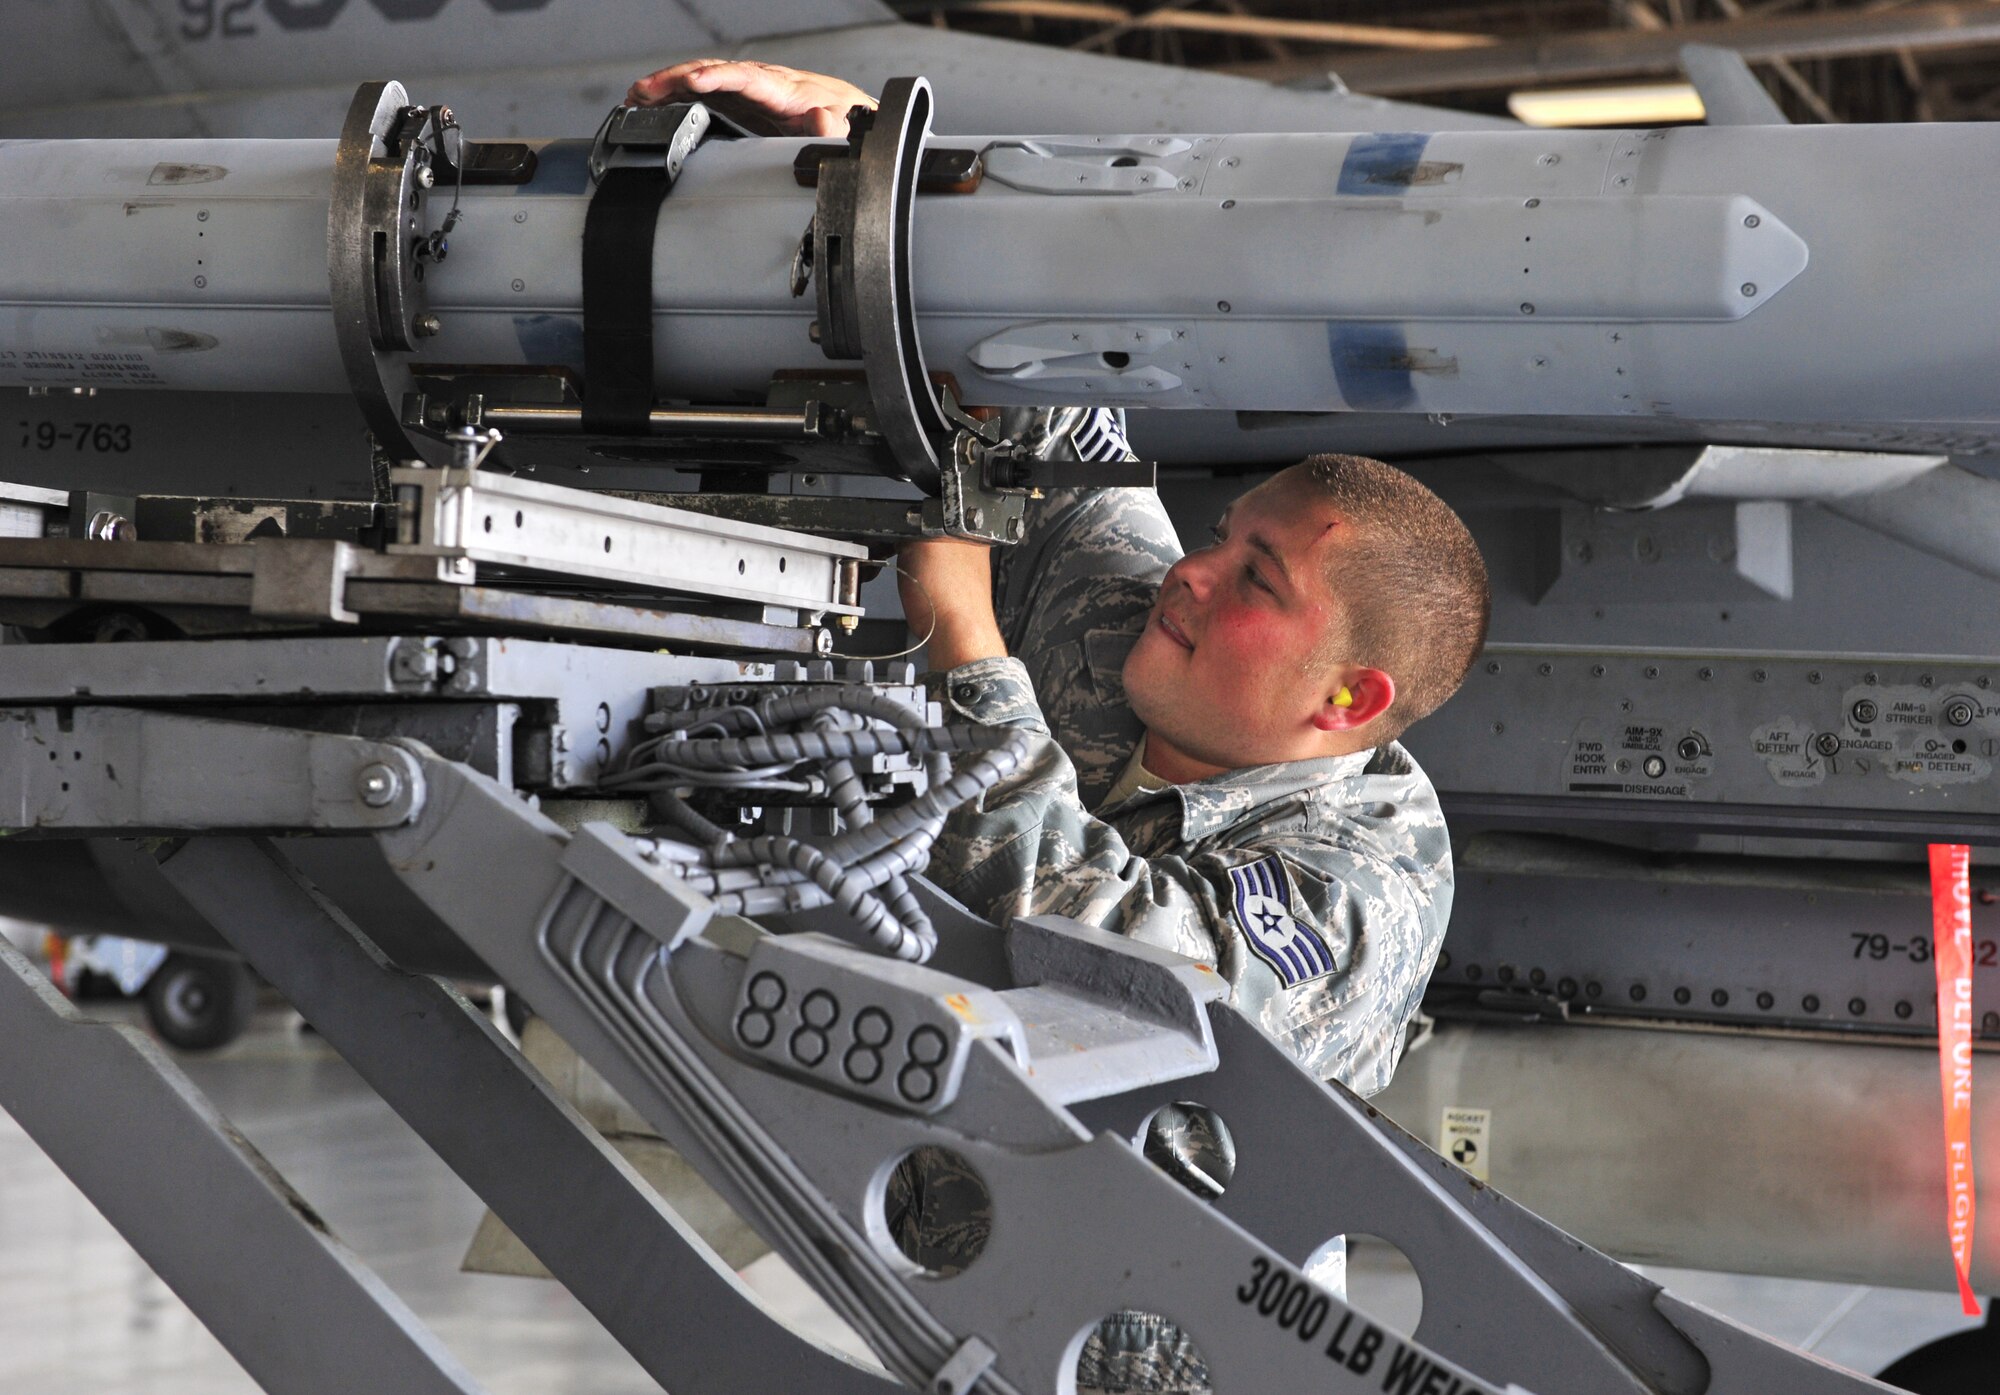 100416-F-8430J-173
SHAW AIR FORCE BASE, S.C. -- Staff Sgt. James Seagle, 79th Aircraft Maintenance Unit, secures a missile on to the F-16 April 16, 2010. Wing weapons standardization held the first Weapons Load Crew of the Quarter Competition for 2010. The 55th and 79th Aircraft Maintenance Units Weapons load crews competed against each other in a race against time. Both load crews were tasked to load two air intercept missiles (AIM - 120) and two air-to-ground missiles (AGM - 88) within 45 minutes.  (U.S. Air Force photo/Airman 1st Class Amber E. N. Jacobs)